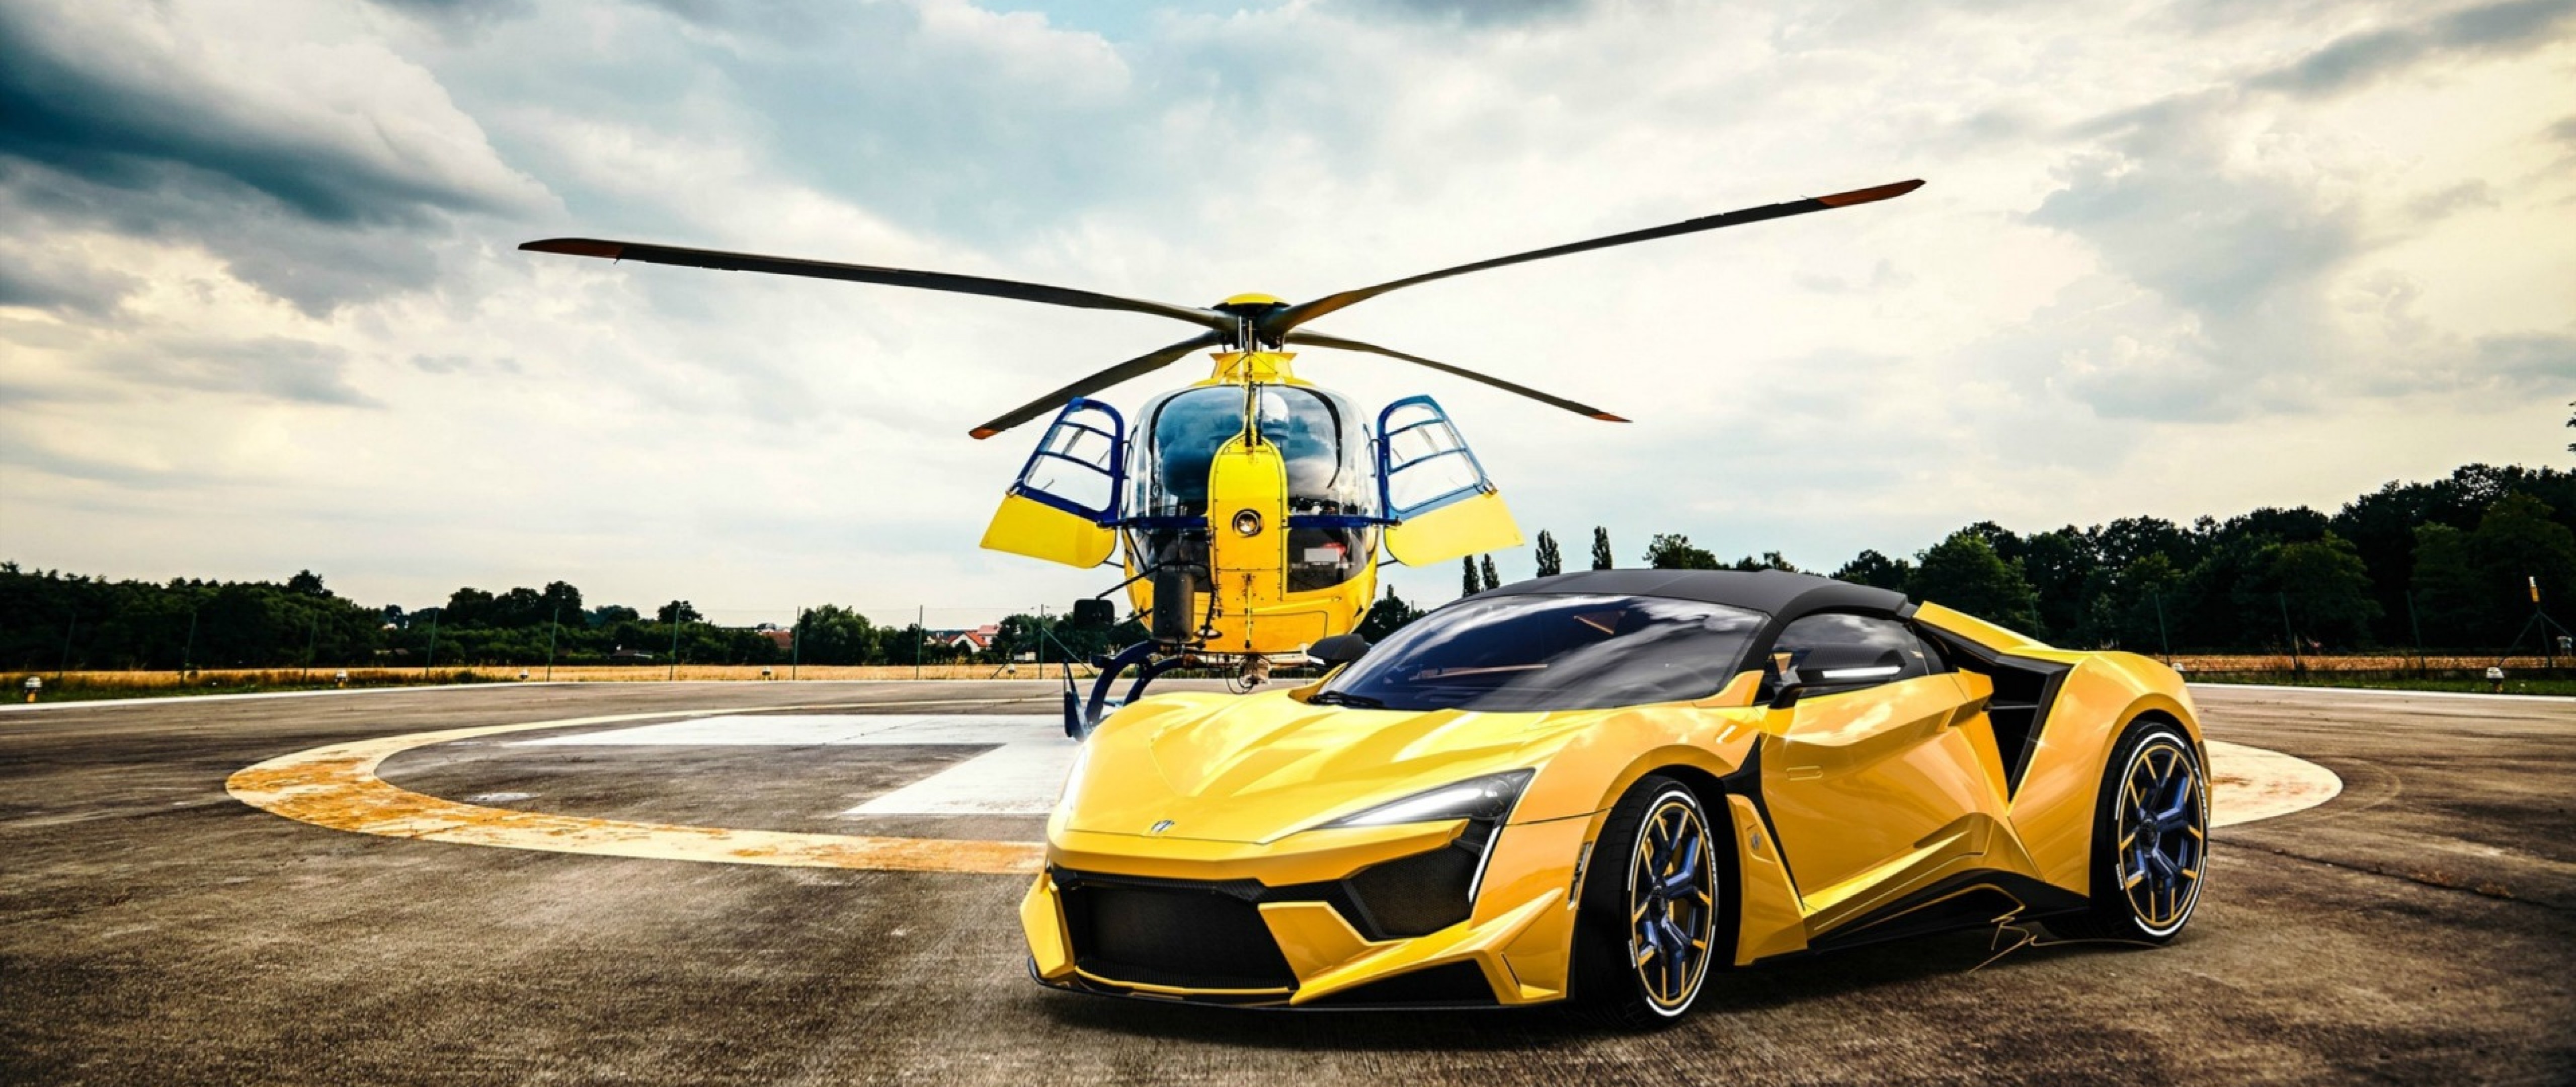 Fenyr Supersport and Helicopter HD Wallpaper 4K Ultra HD Wide TV - HD  Wallpaper 